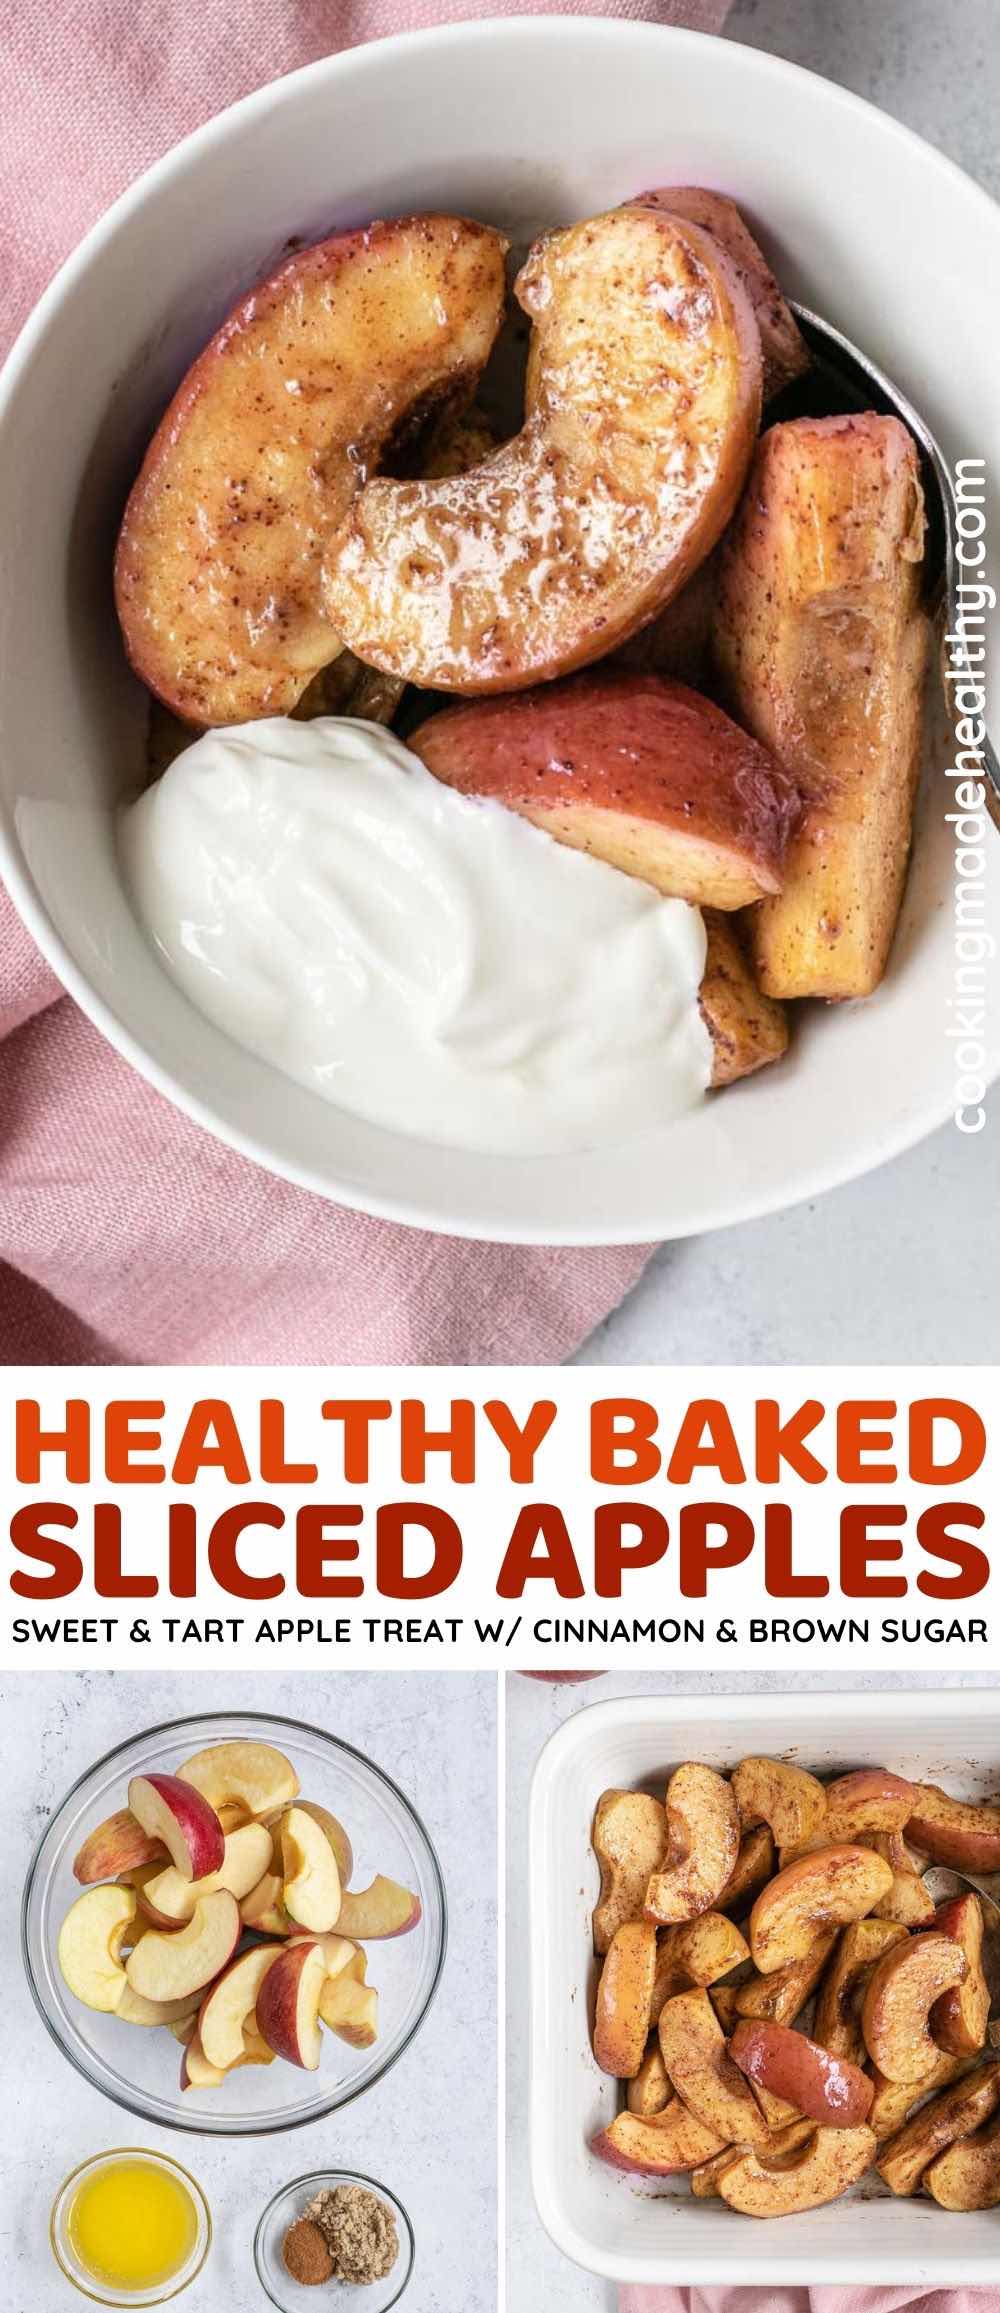 Healthy Baked Sliced Apples Collage